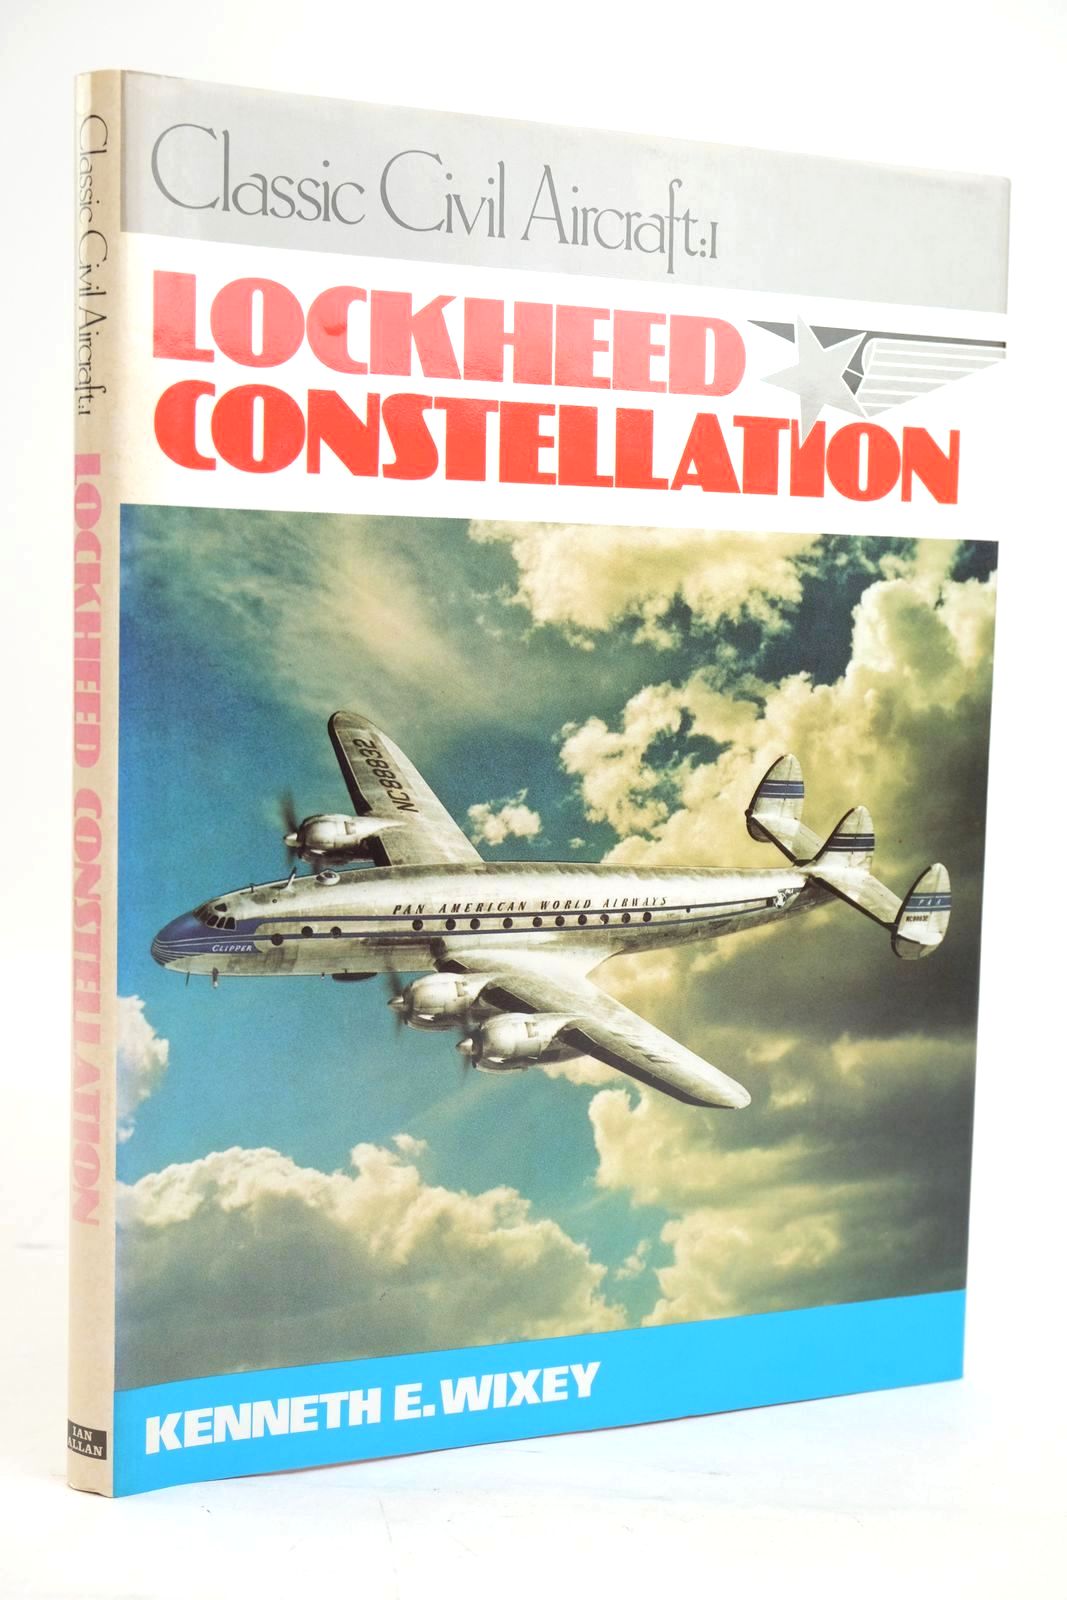 Photo of CLASSIC CIVIL AIRCRAFT:1 LOCKHEED CONSTELLATION written by Wixey, Kenneth E. published by Ian Allan Ltd. (STOCK CODE: 1319651)  for sale by Stella & Rose's Books